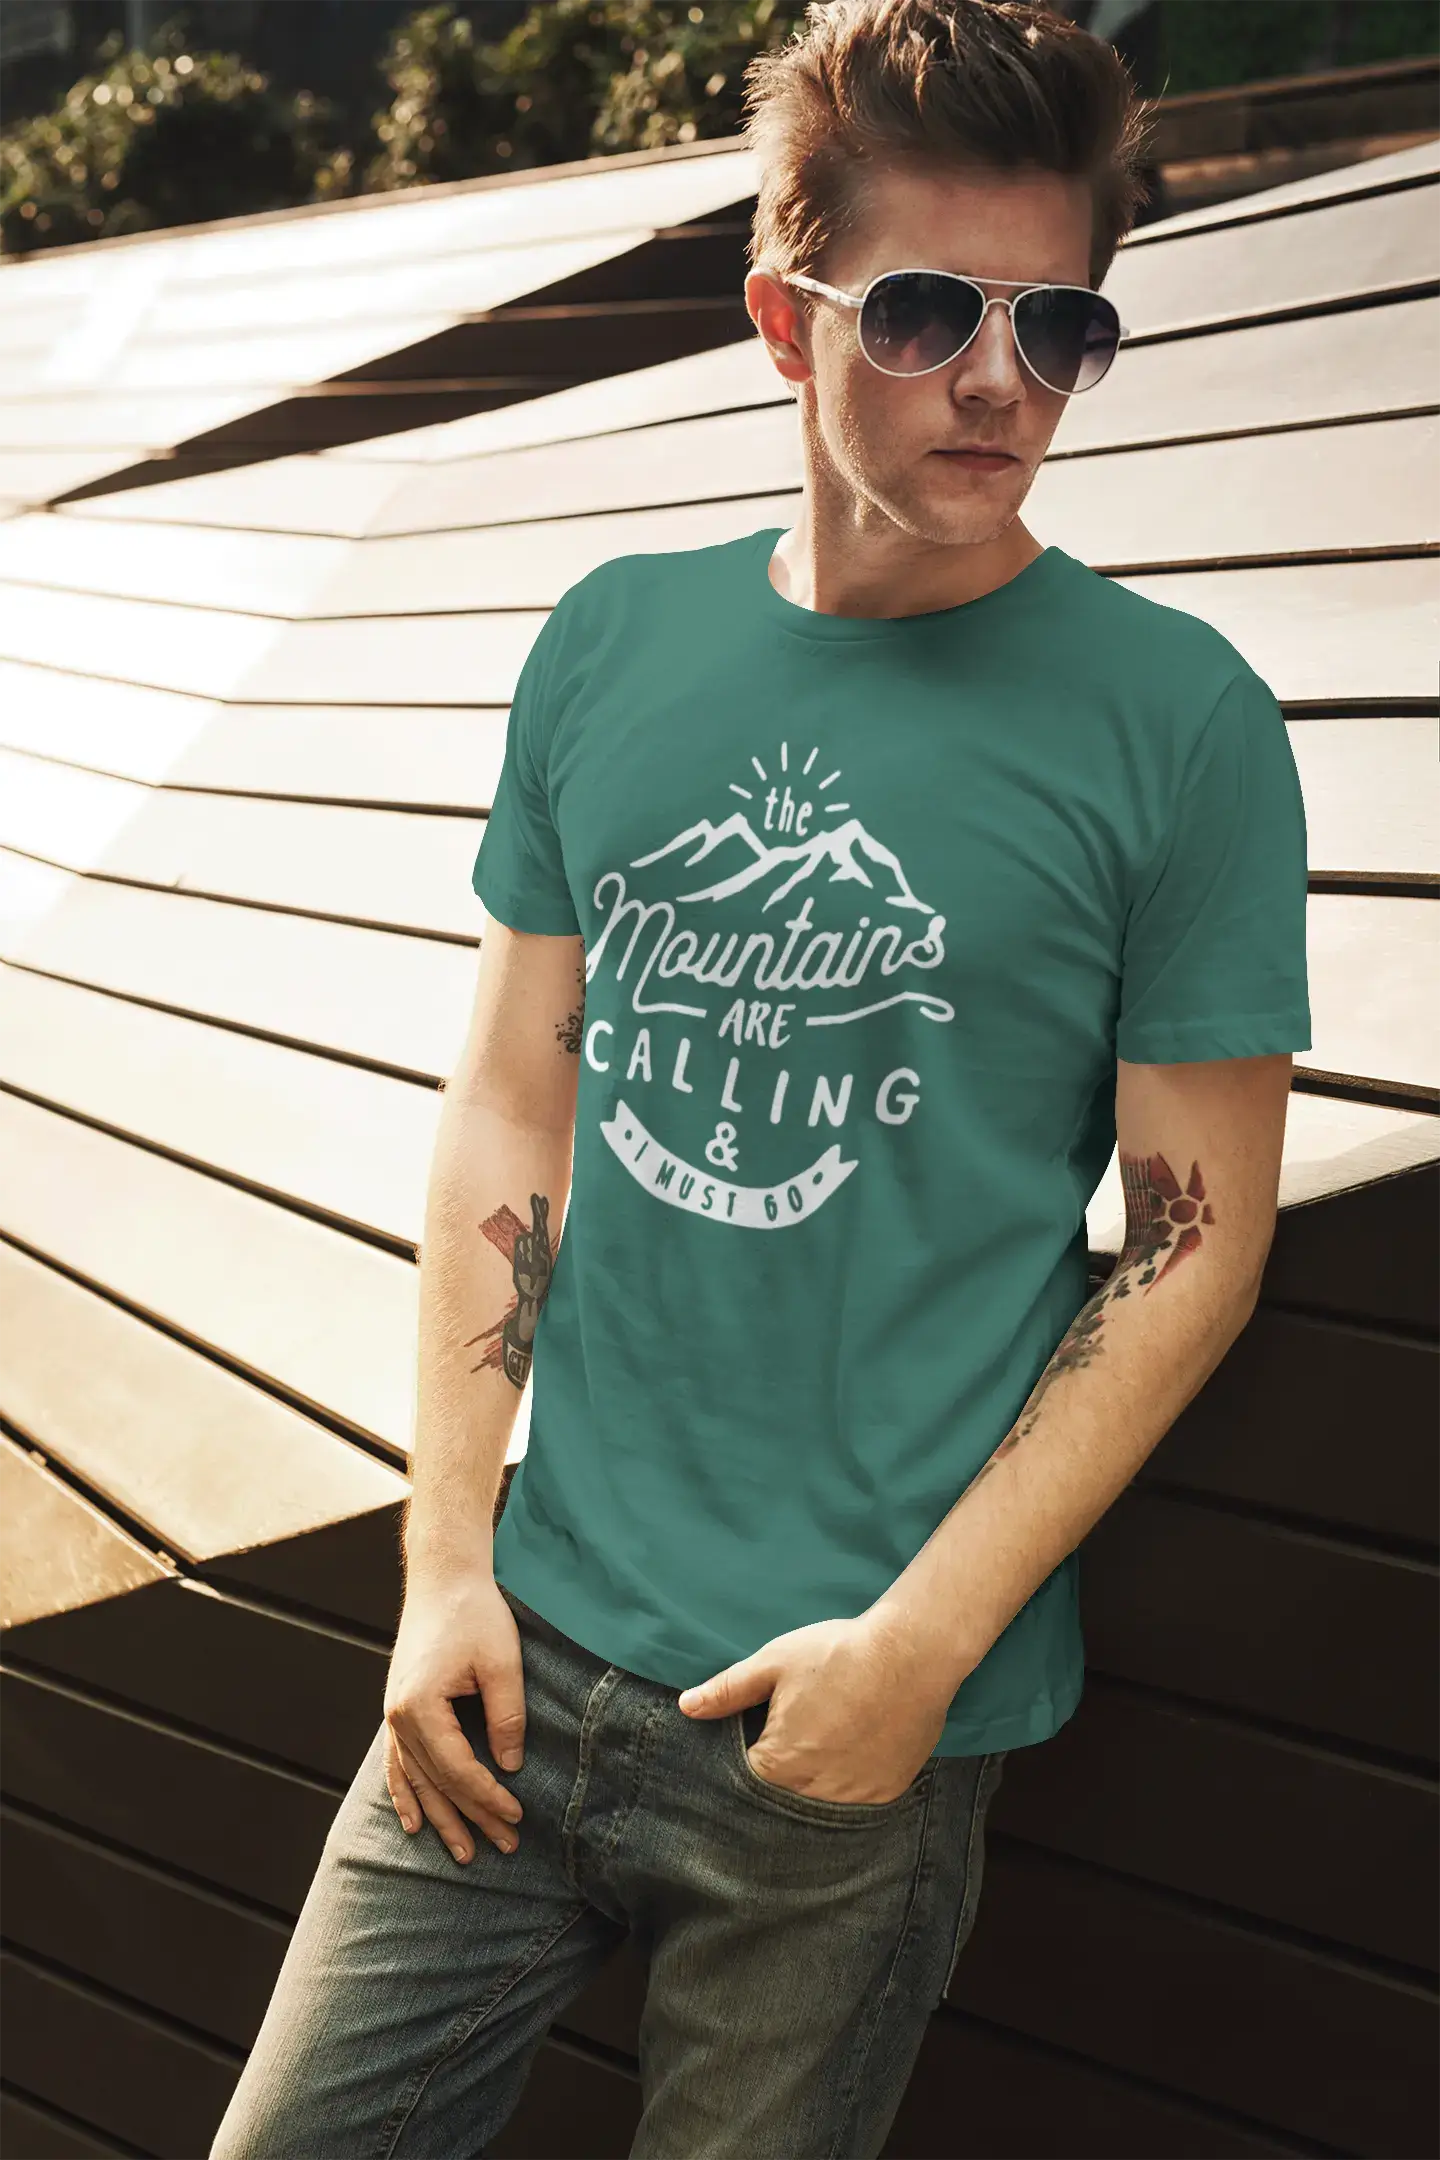 ULTRABASIC - Graphic Printed Men's The Mountains Are Calling And I Must Go Hiking Tee Royal Blue